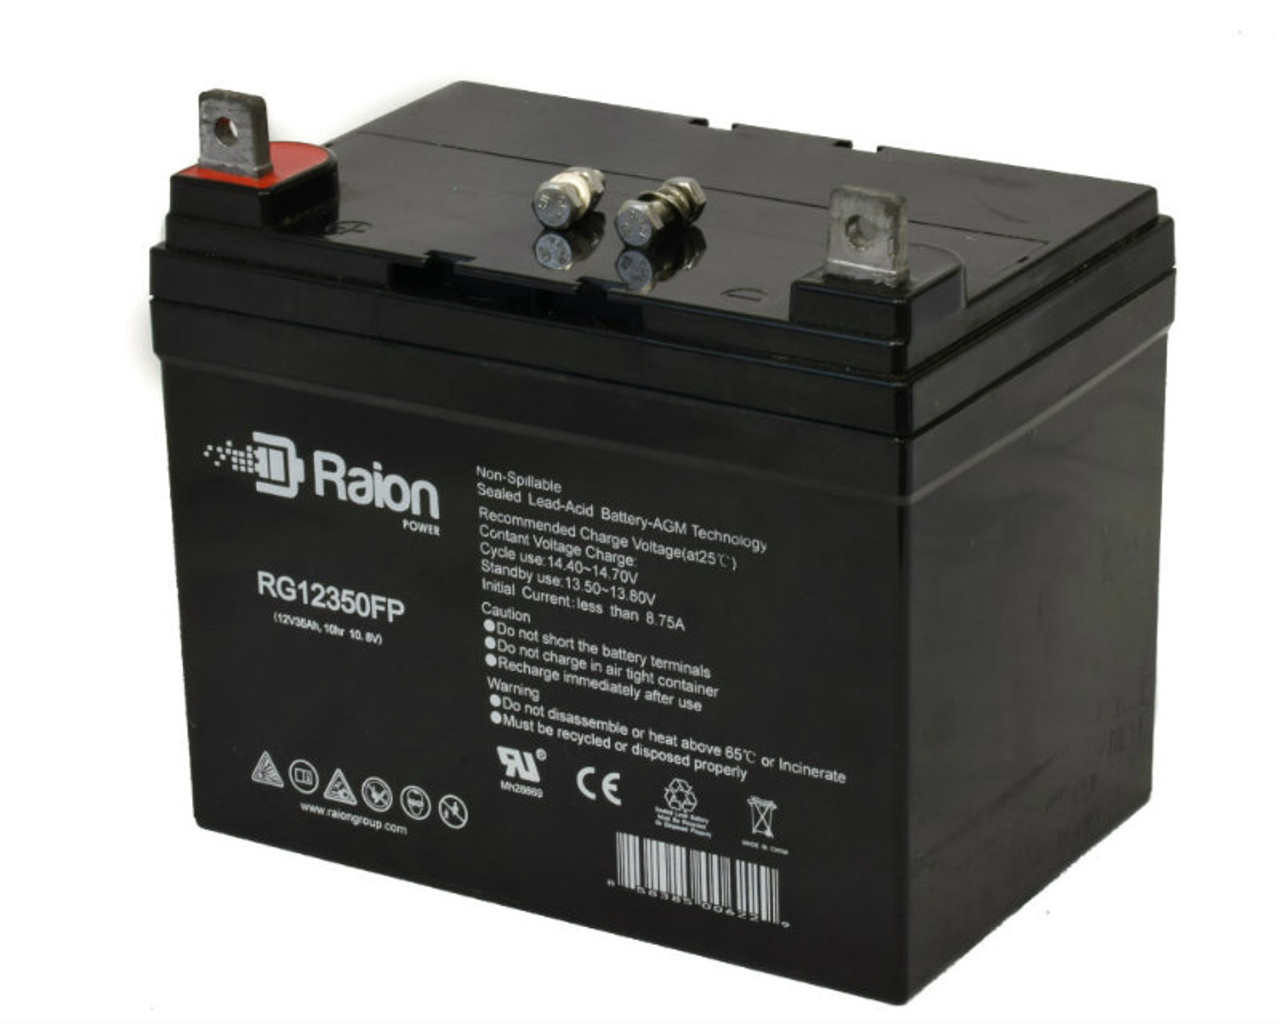 Raion Power Replacement 12V 35Ah RG12350FP Mobility Scooter Battery for Ranger All Seasons Solo LV